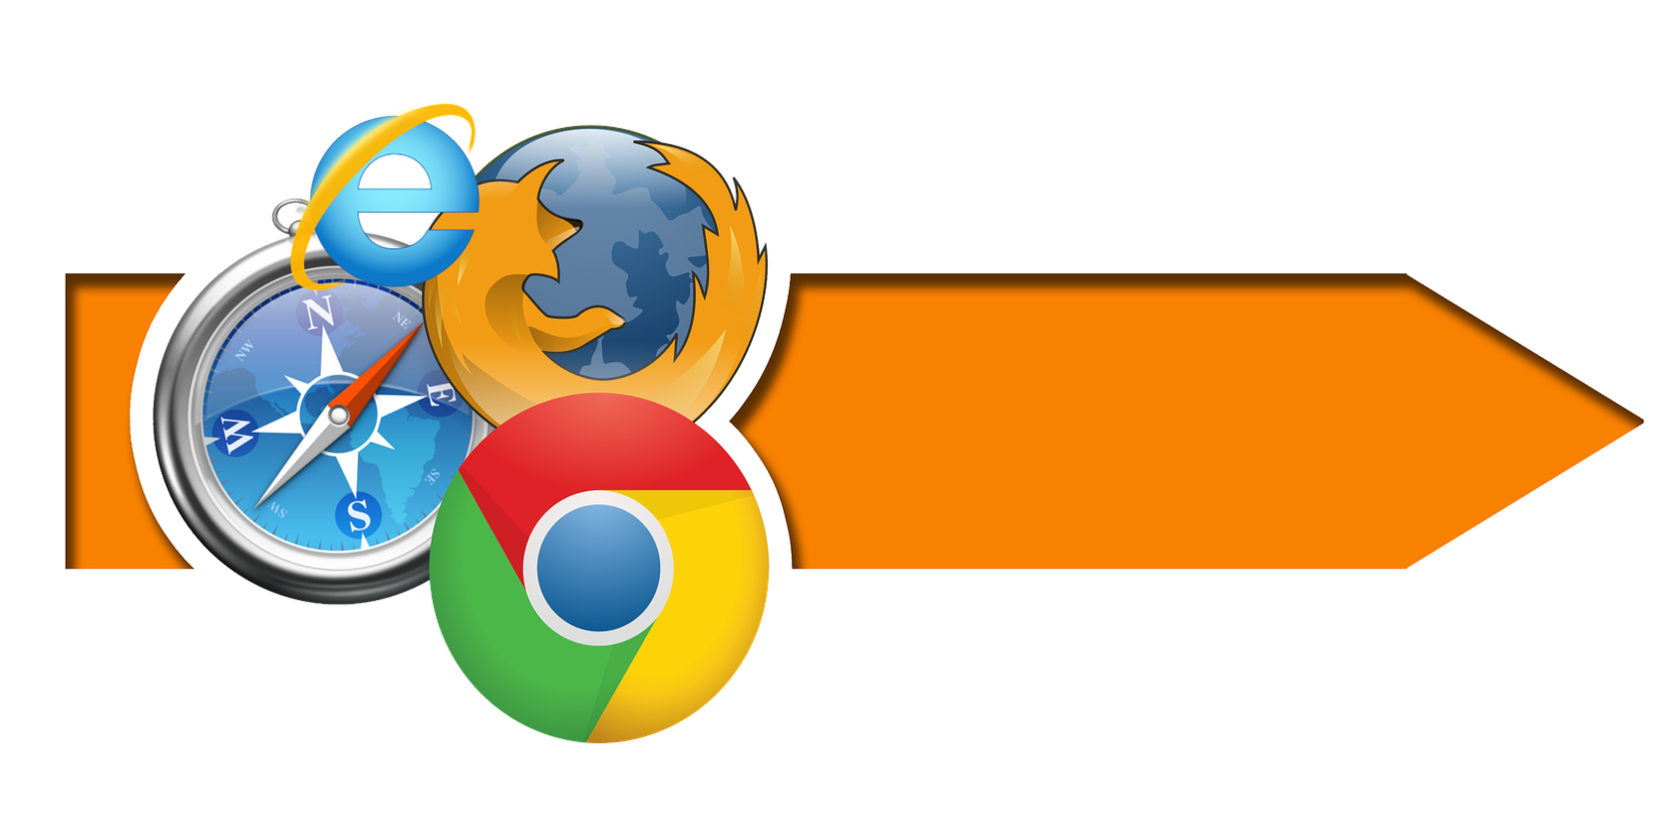 Why You Should Use Multiple Web Browsers